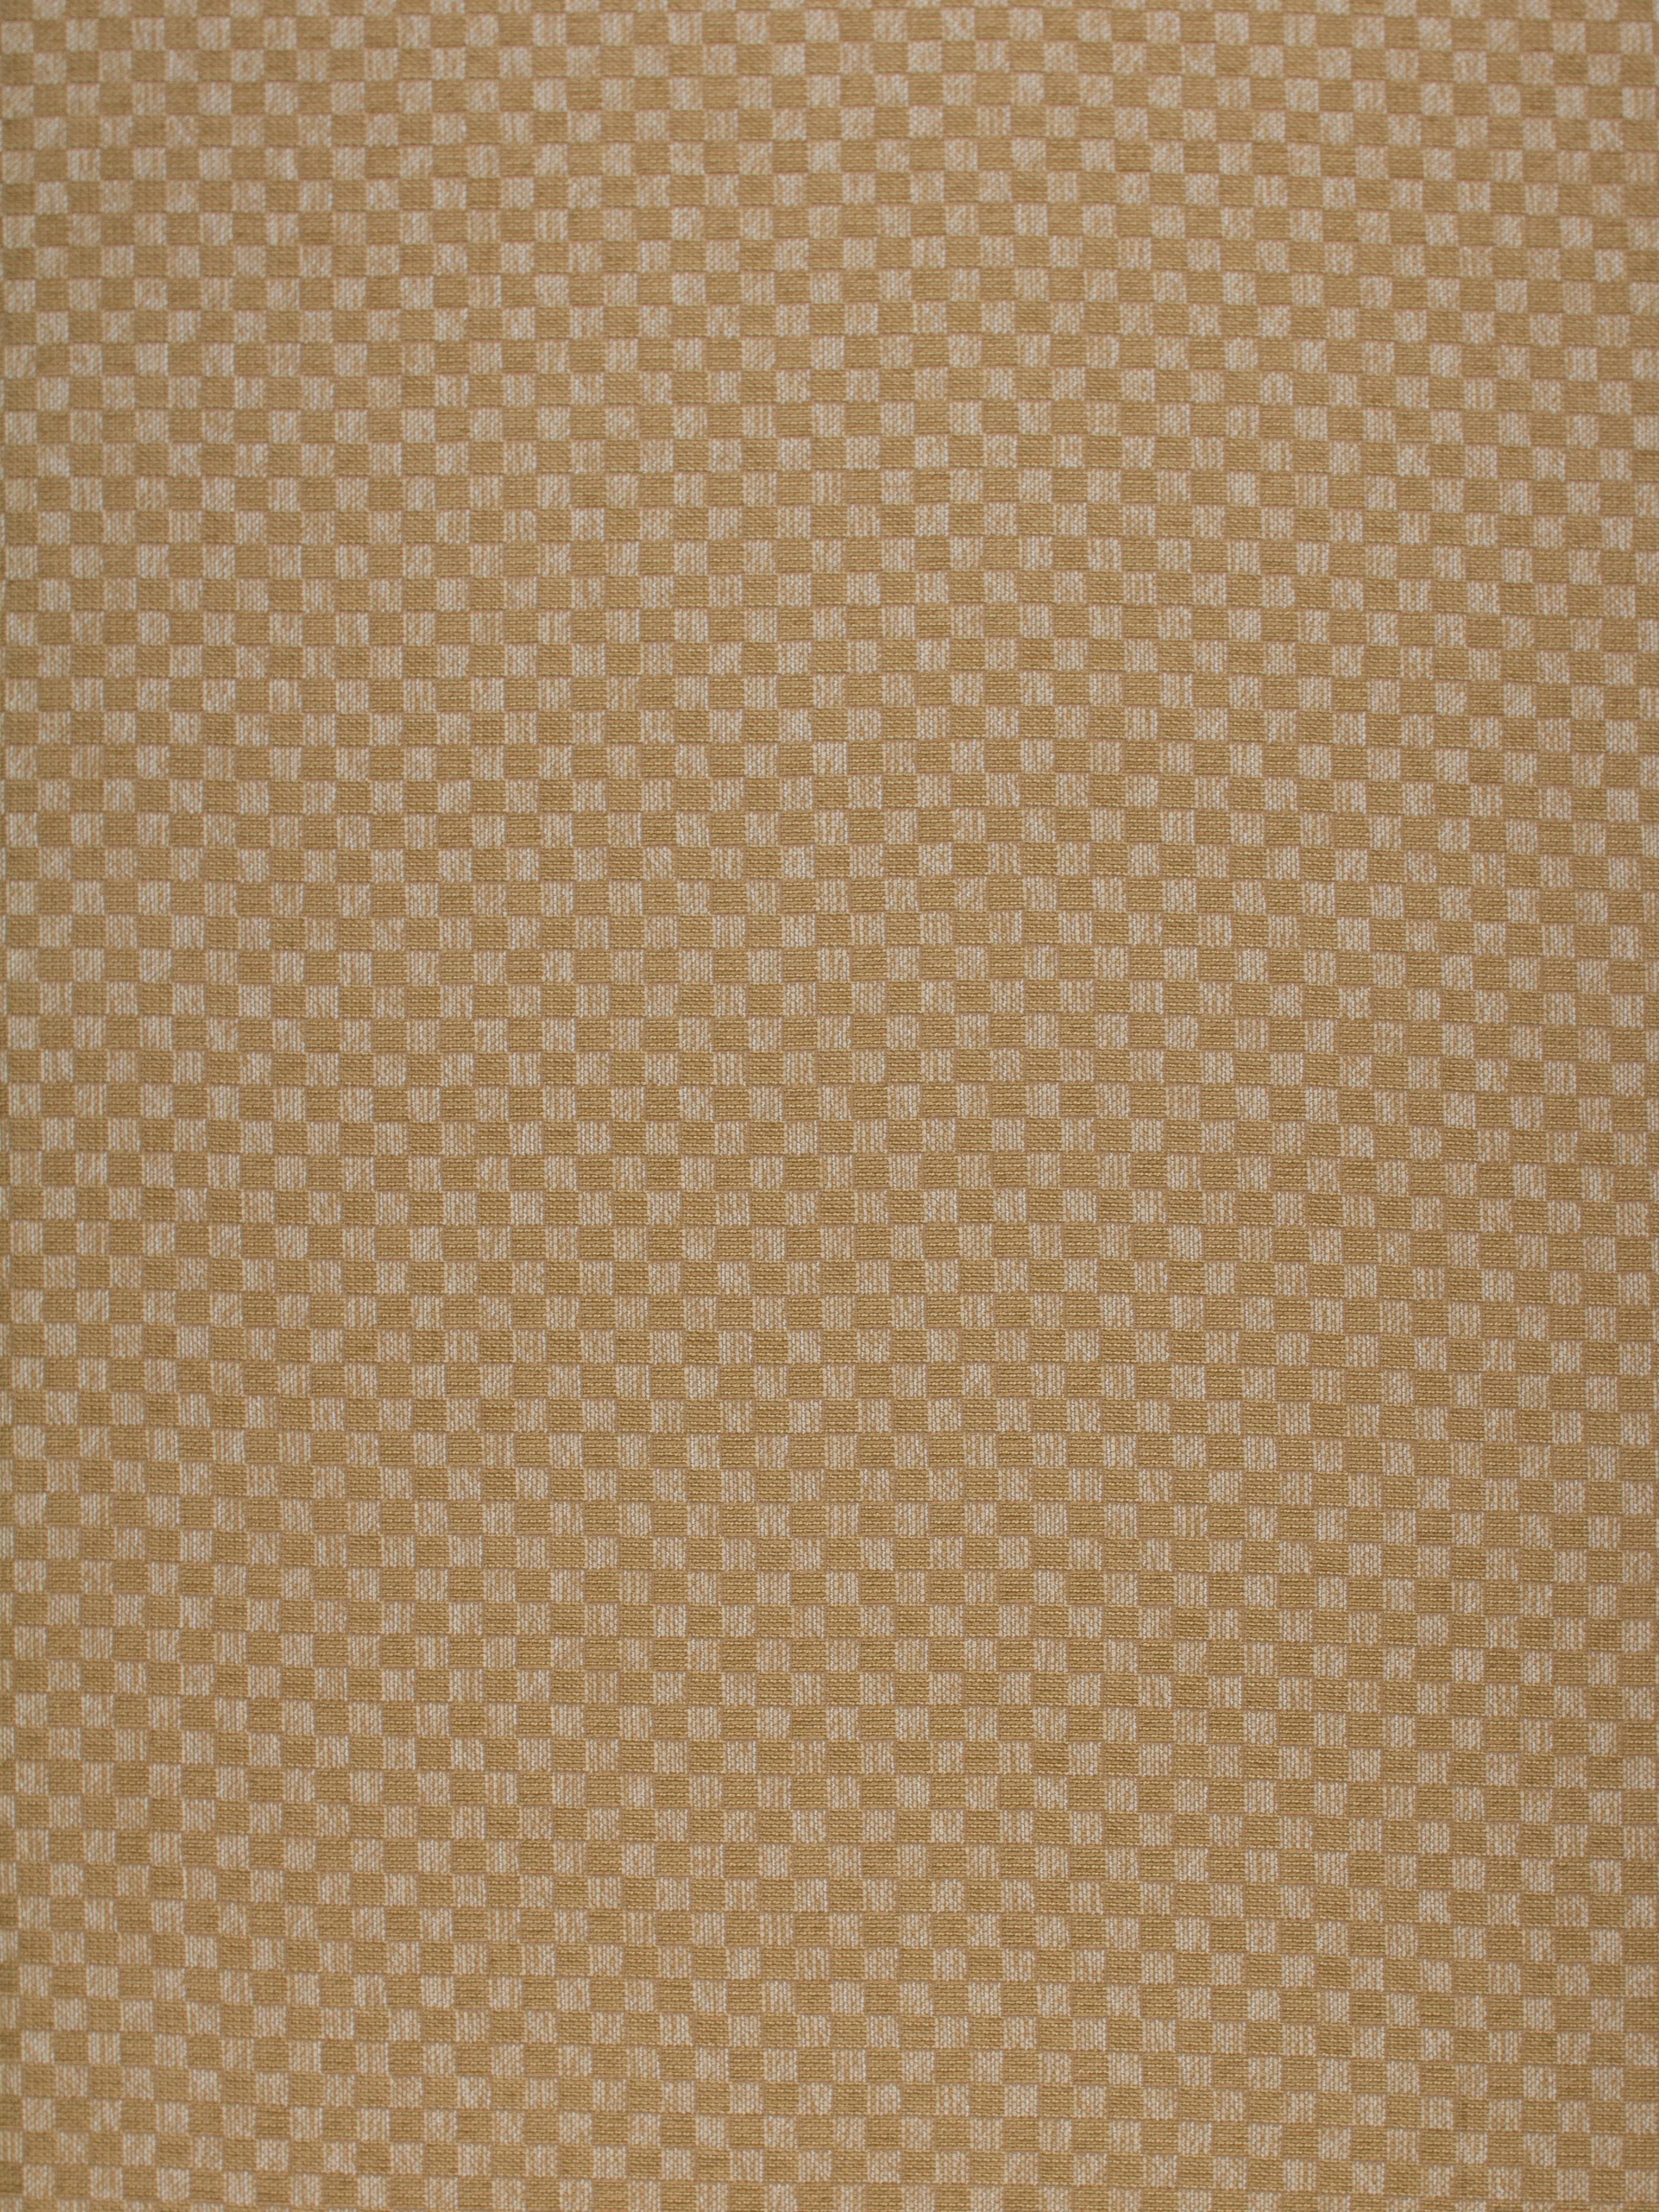 Parke fabric in wheat color - pattern number HR 12812001 - by Scalamandre in the Old World Weavers collection